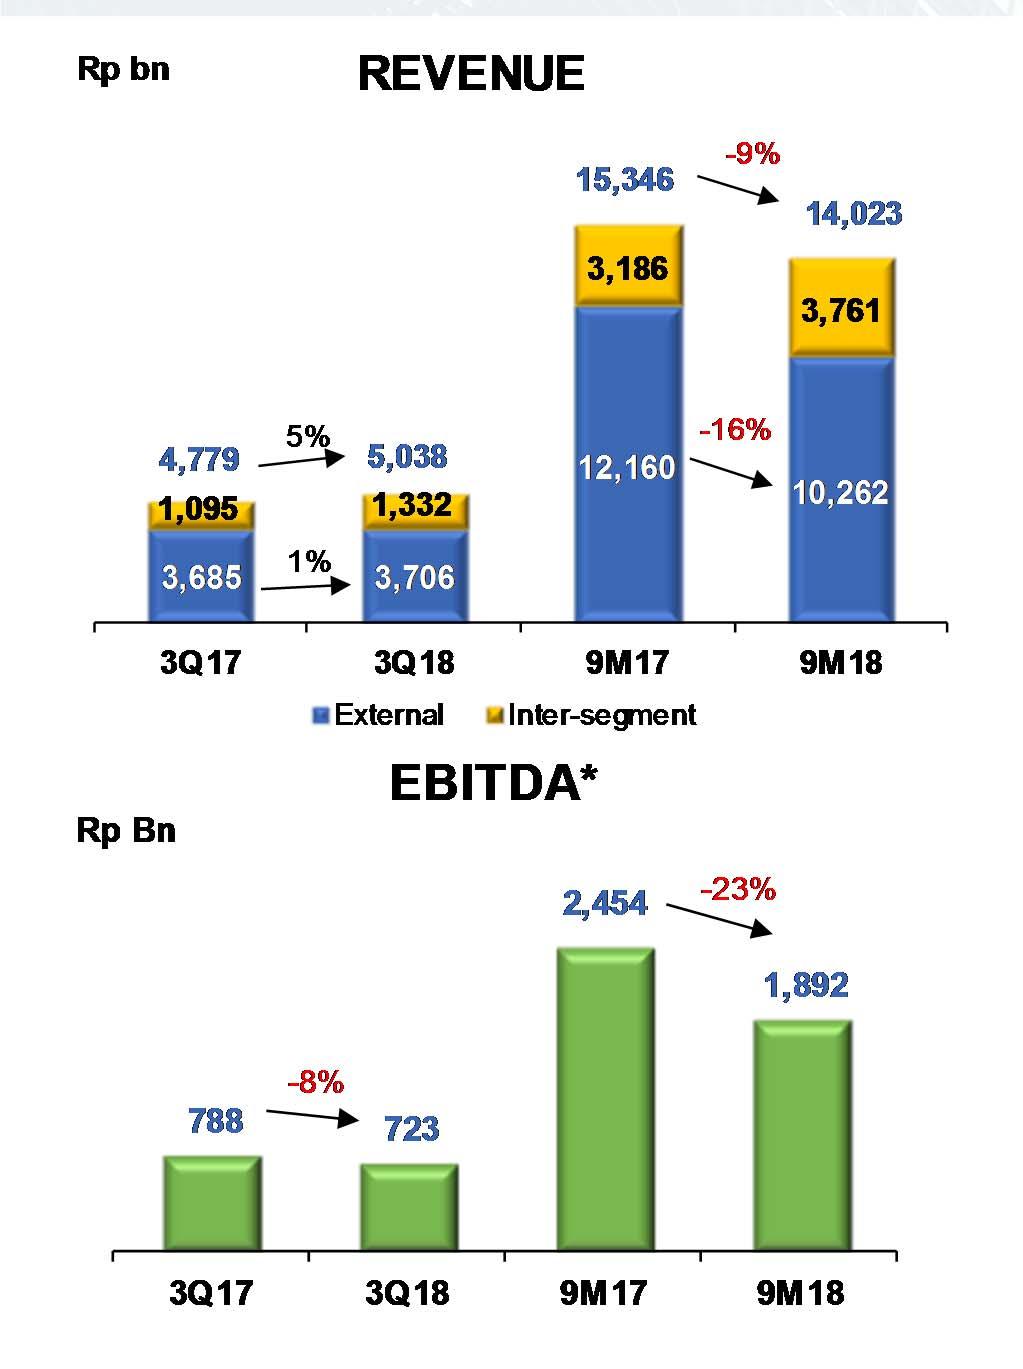 Results Summary Financial Highlights Revenue declined in 9M18 on lower sales contributions from Plantation Division. This was partly offset by a solid 3Q sales growth of 24% at EOF Division.